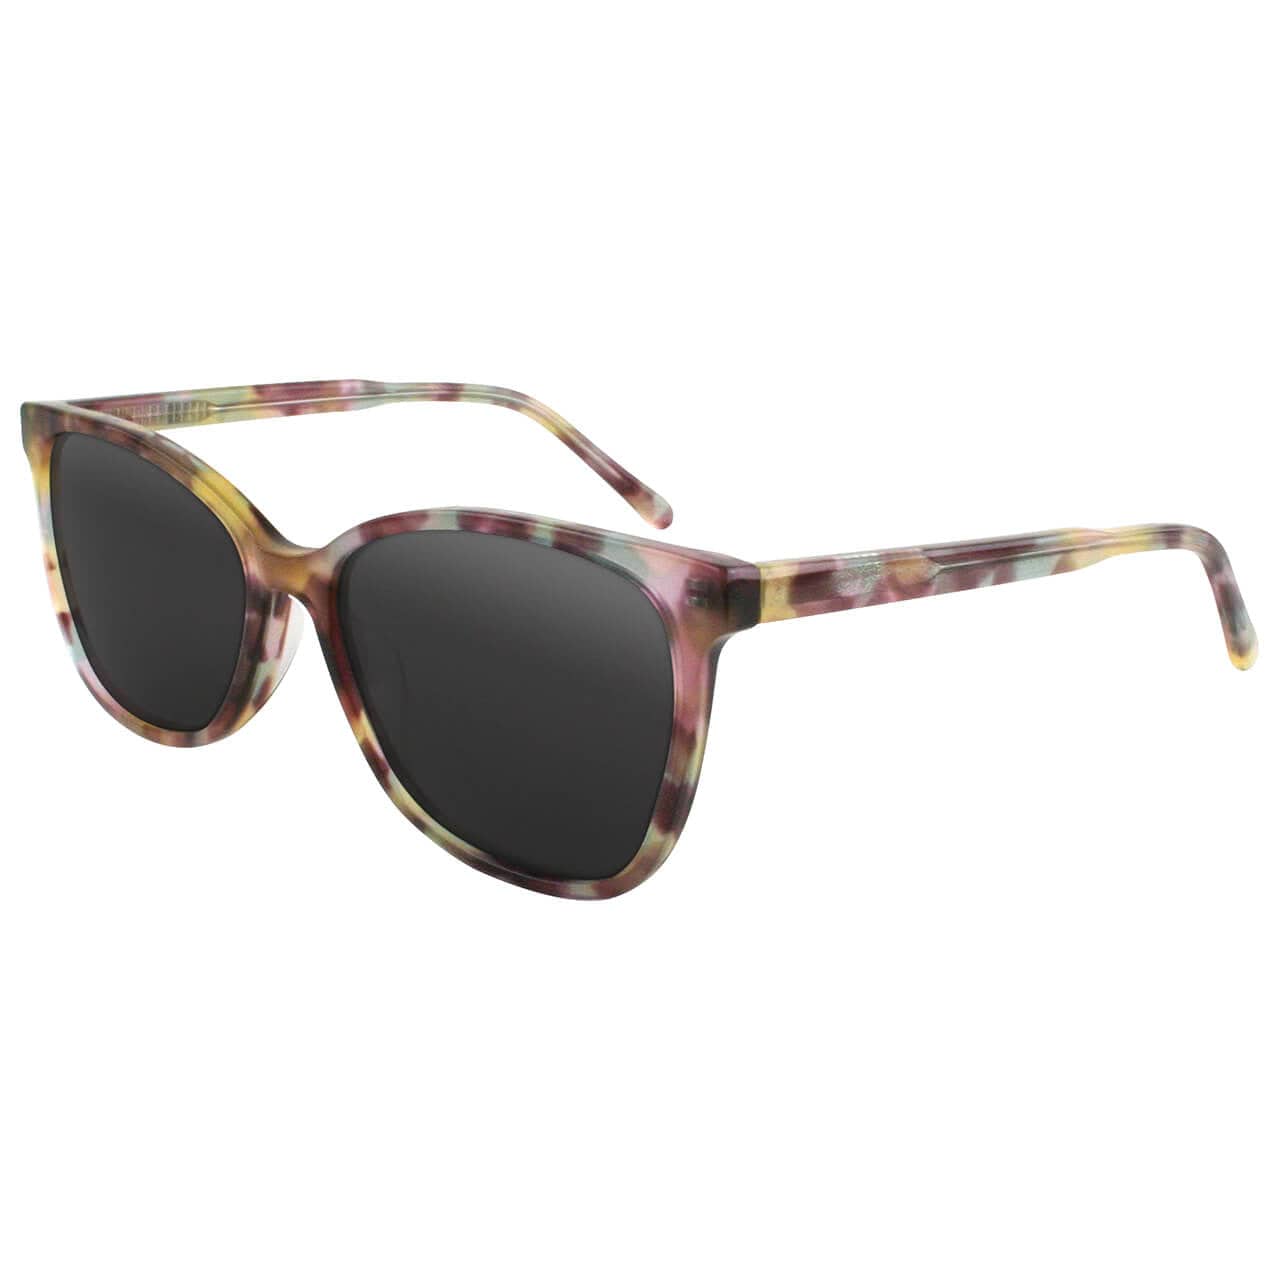 Solect Silk Sunglasses with Tortoise Pink Frame and Gray Polarized Lenses